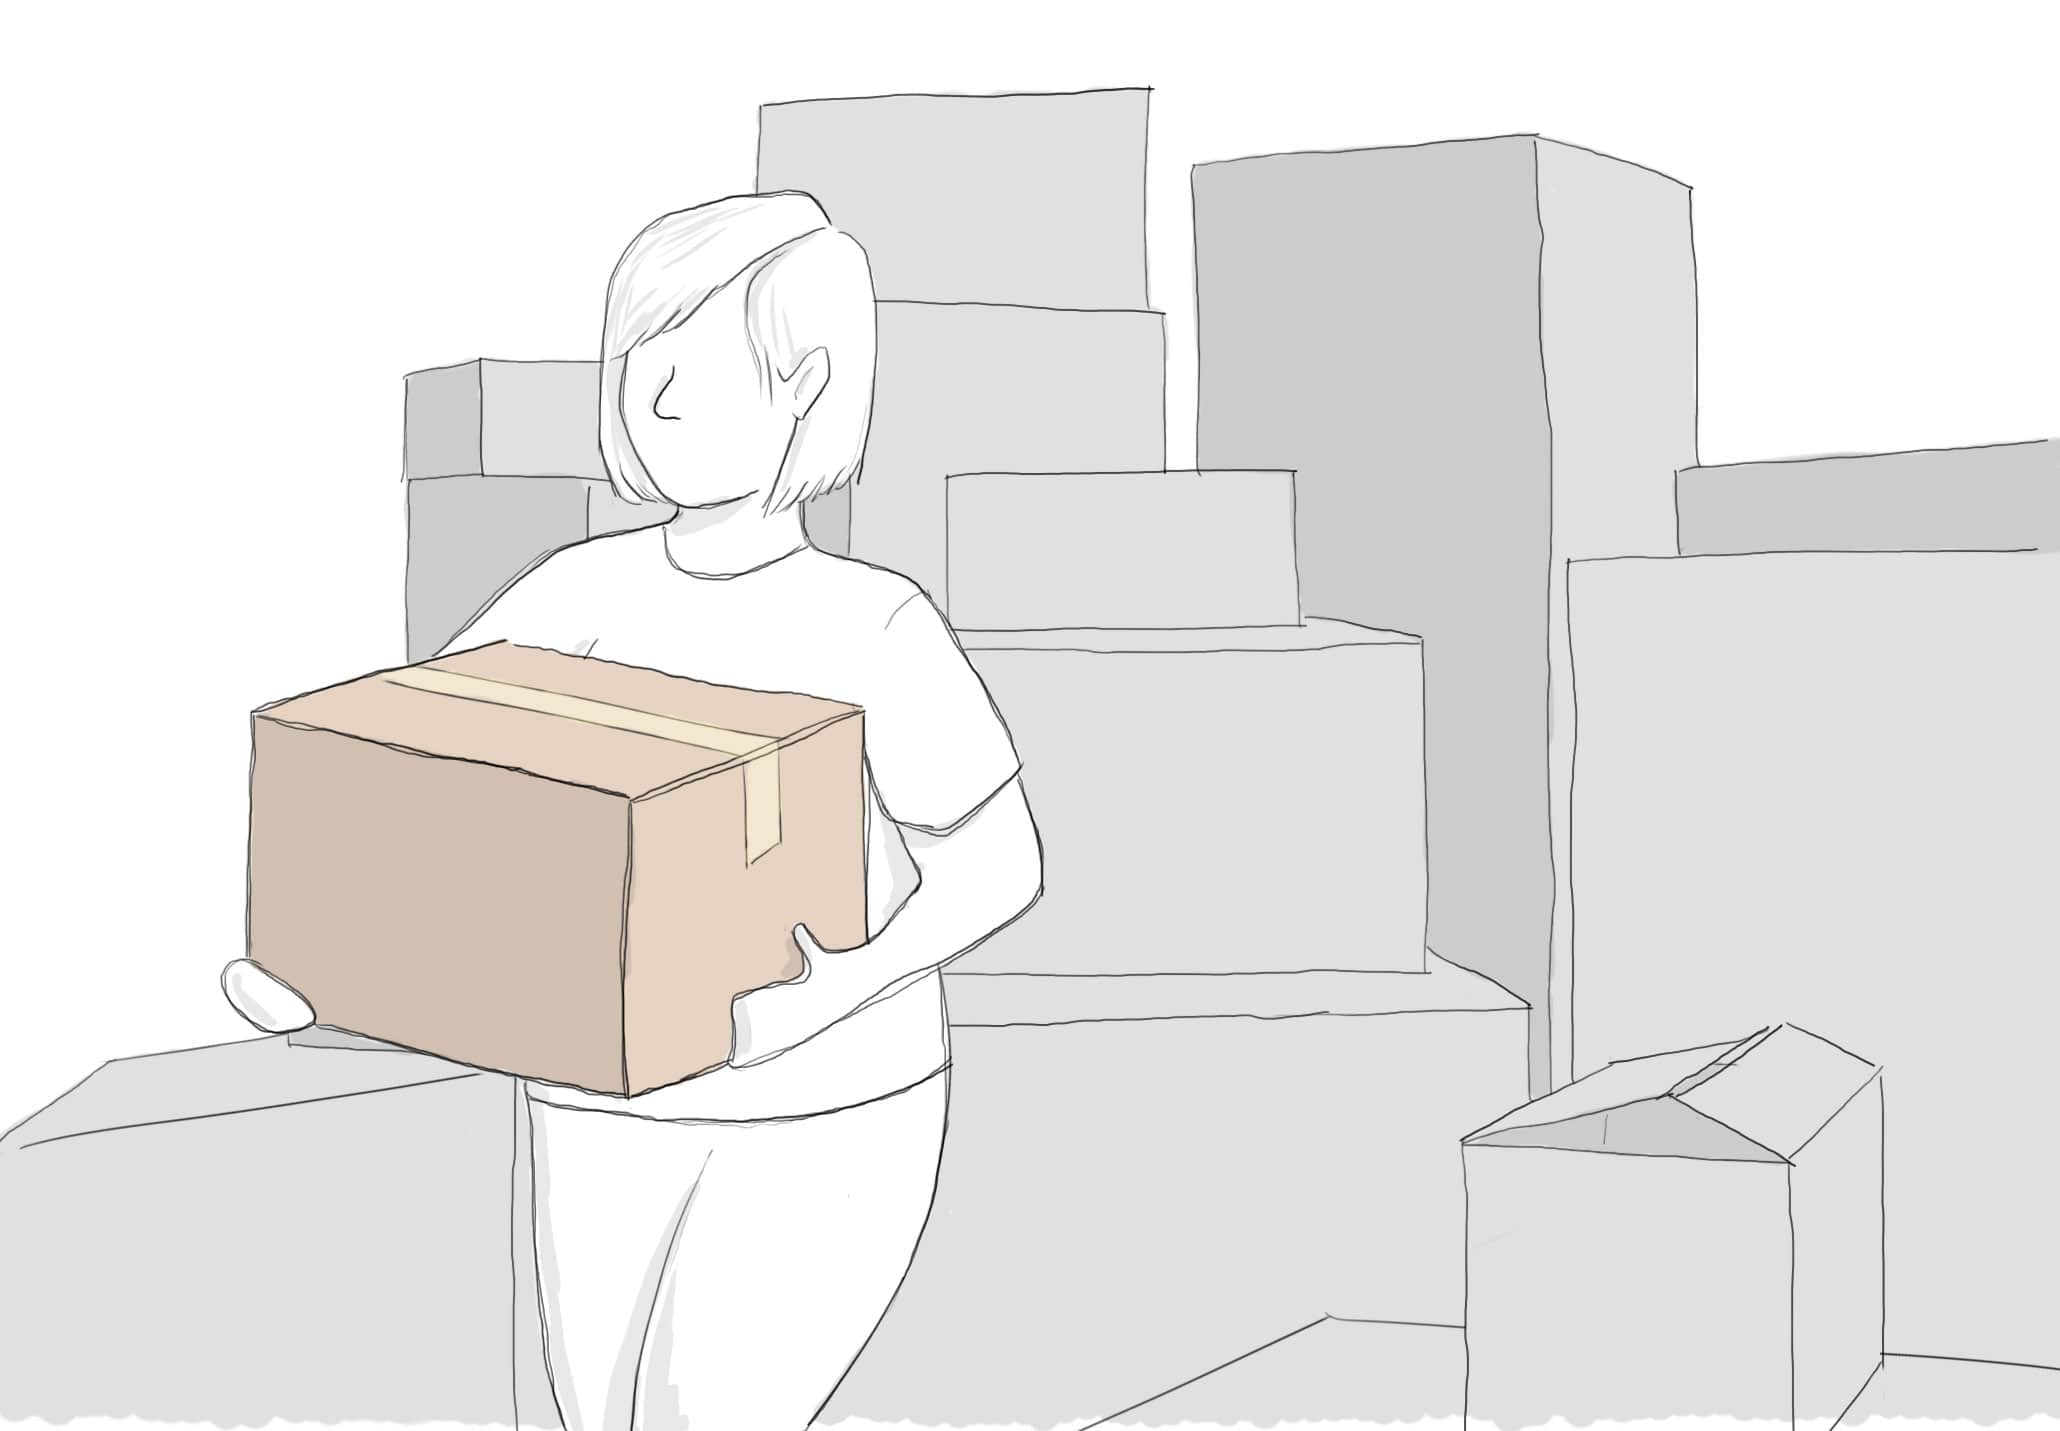 A woman carries a box from a stack of boxes